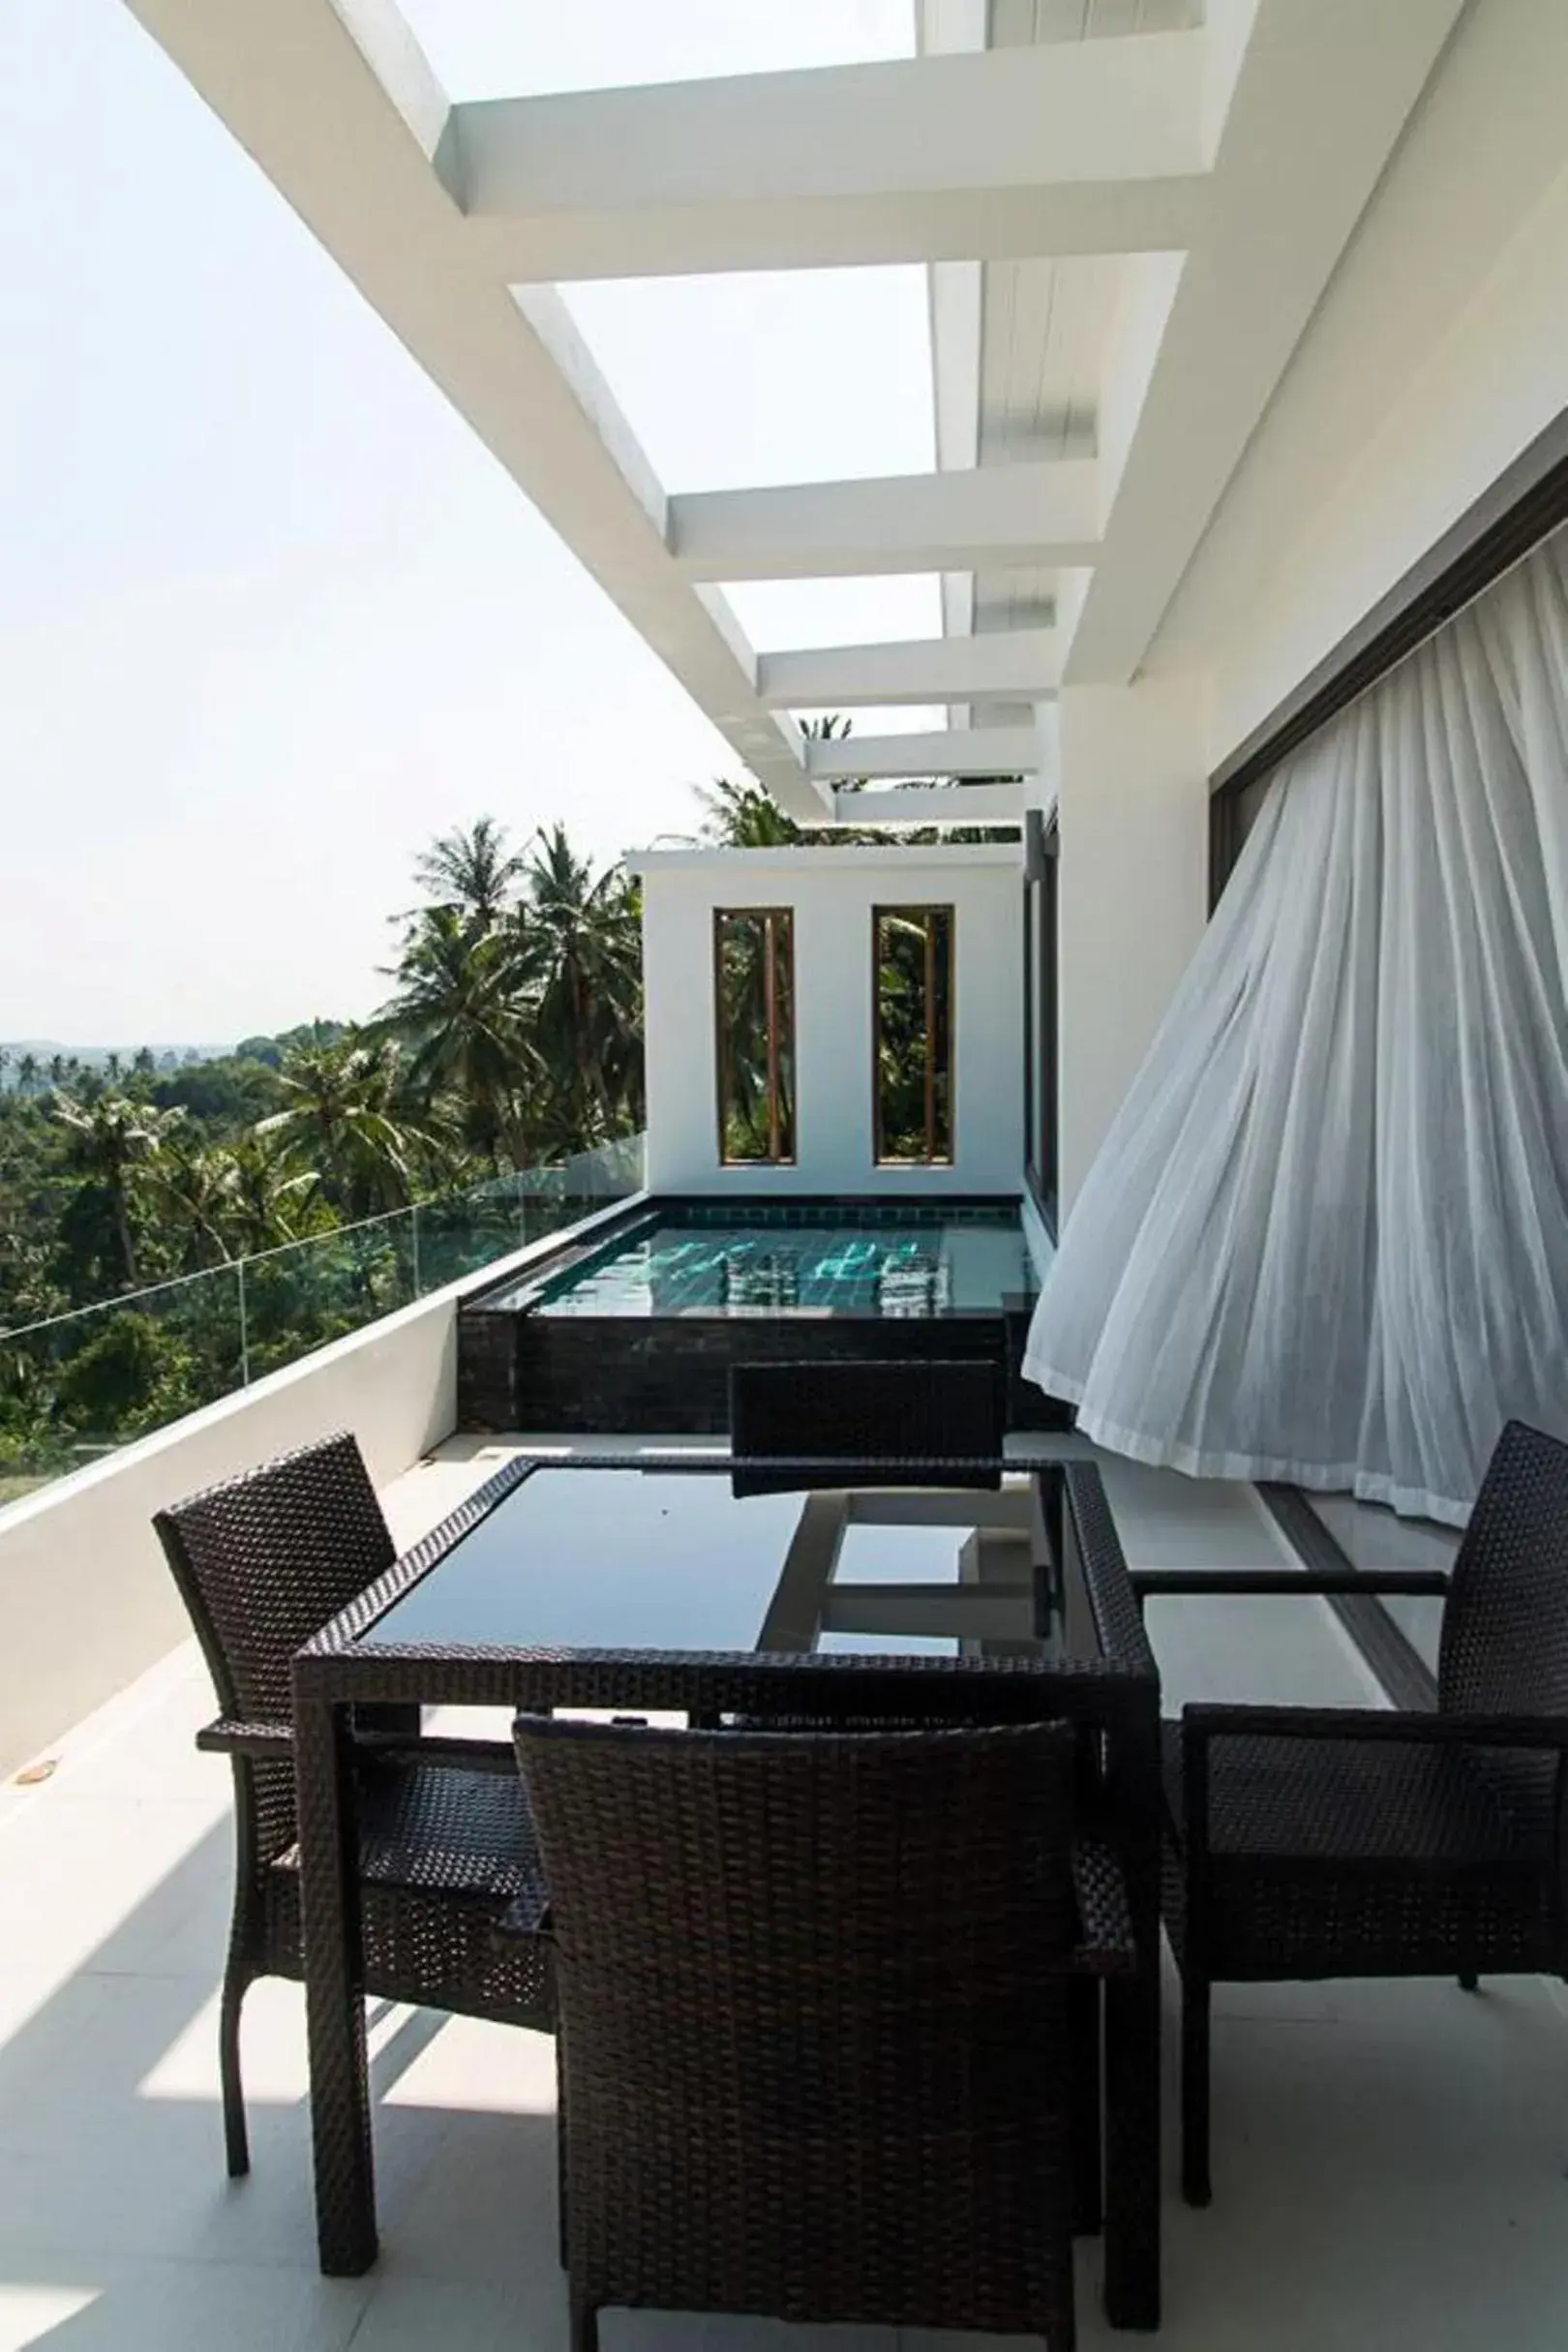 Balcony/Terrace, Swimming Pool in Tropical Sea View Residence